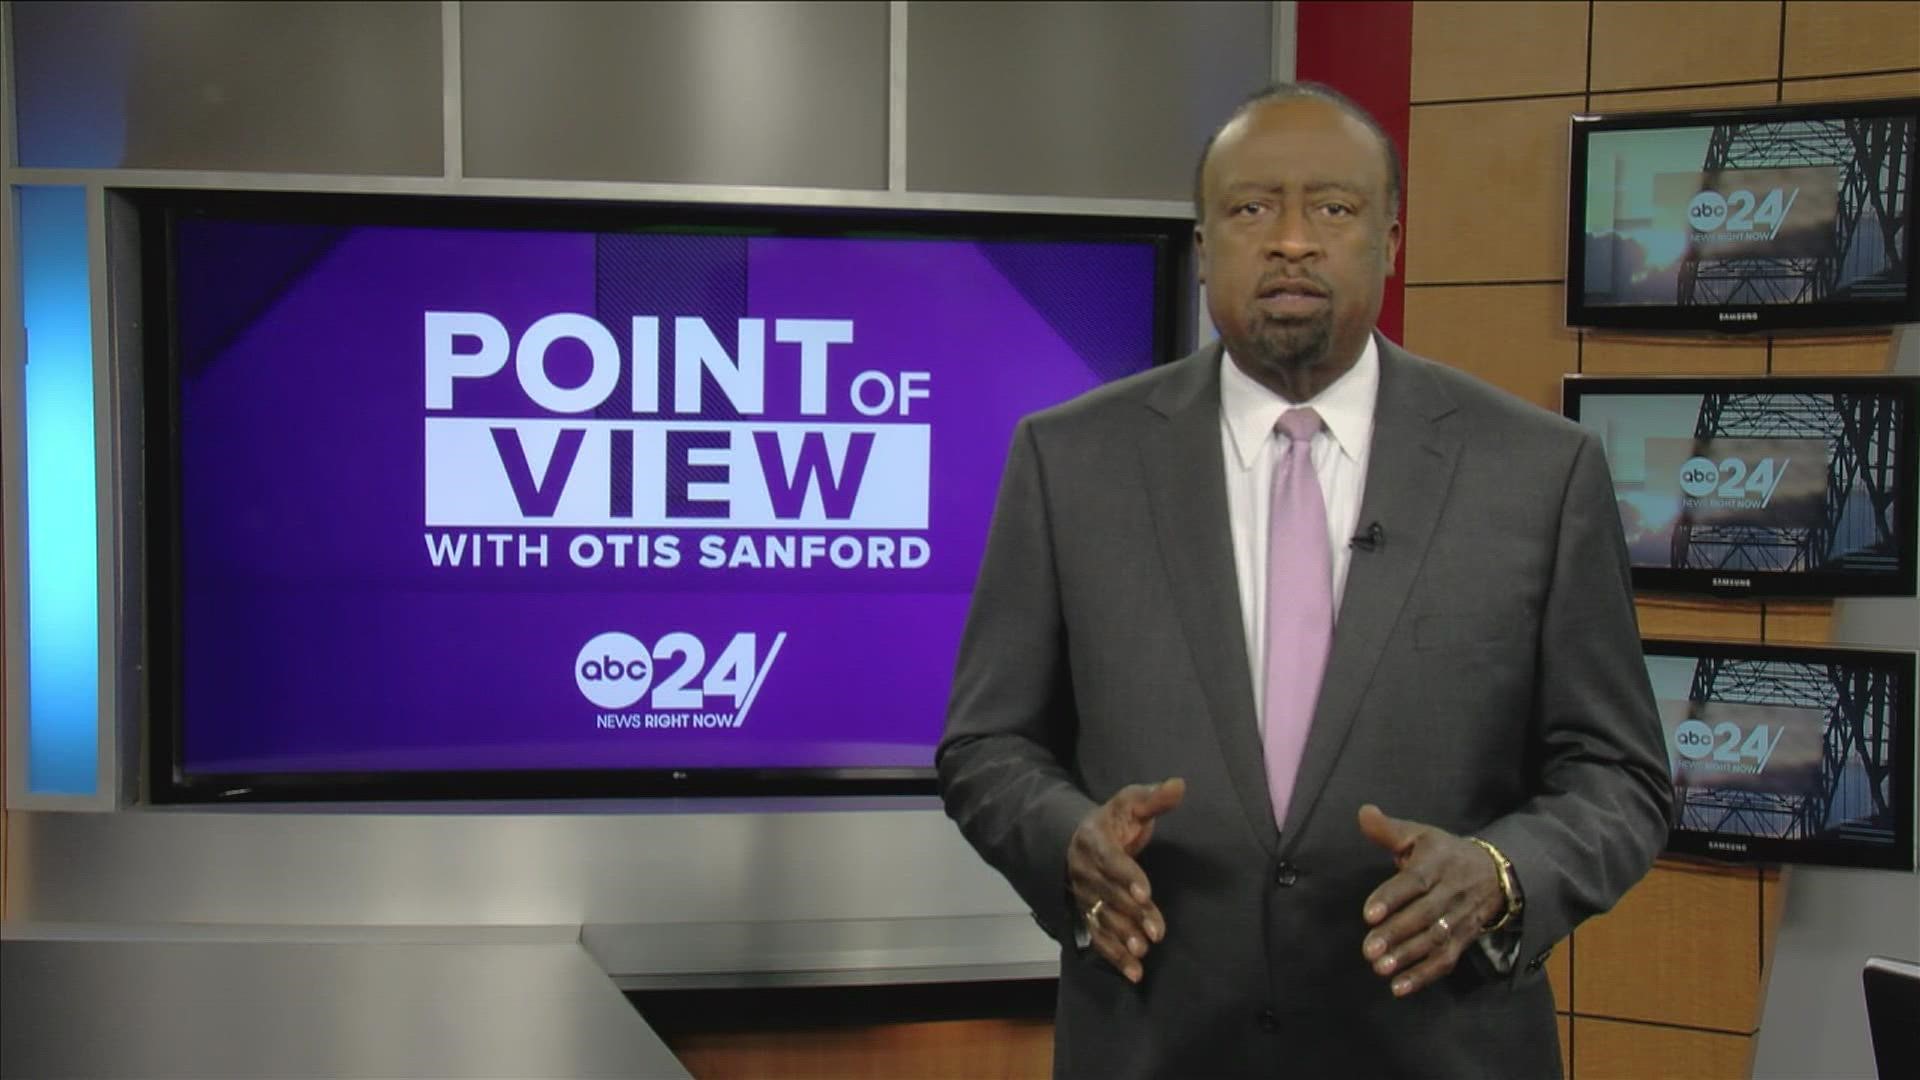 ABC 24 political analyst and commentator Otis Sanford shared his point of view on the Loews Hotels project dropping its plans in downtown Memphis.